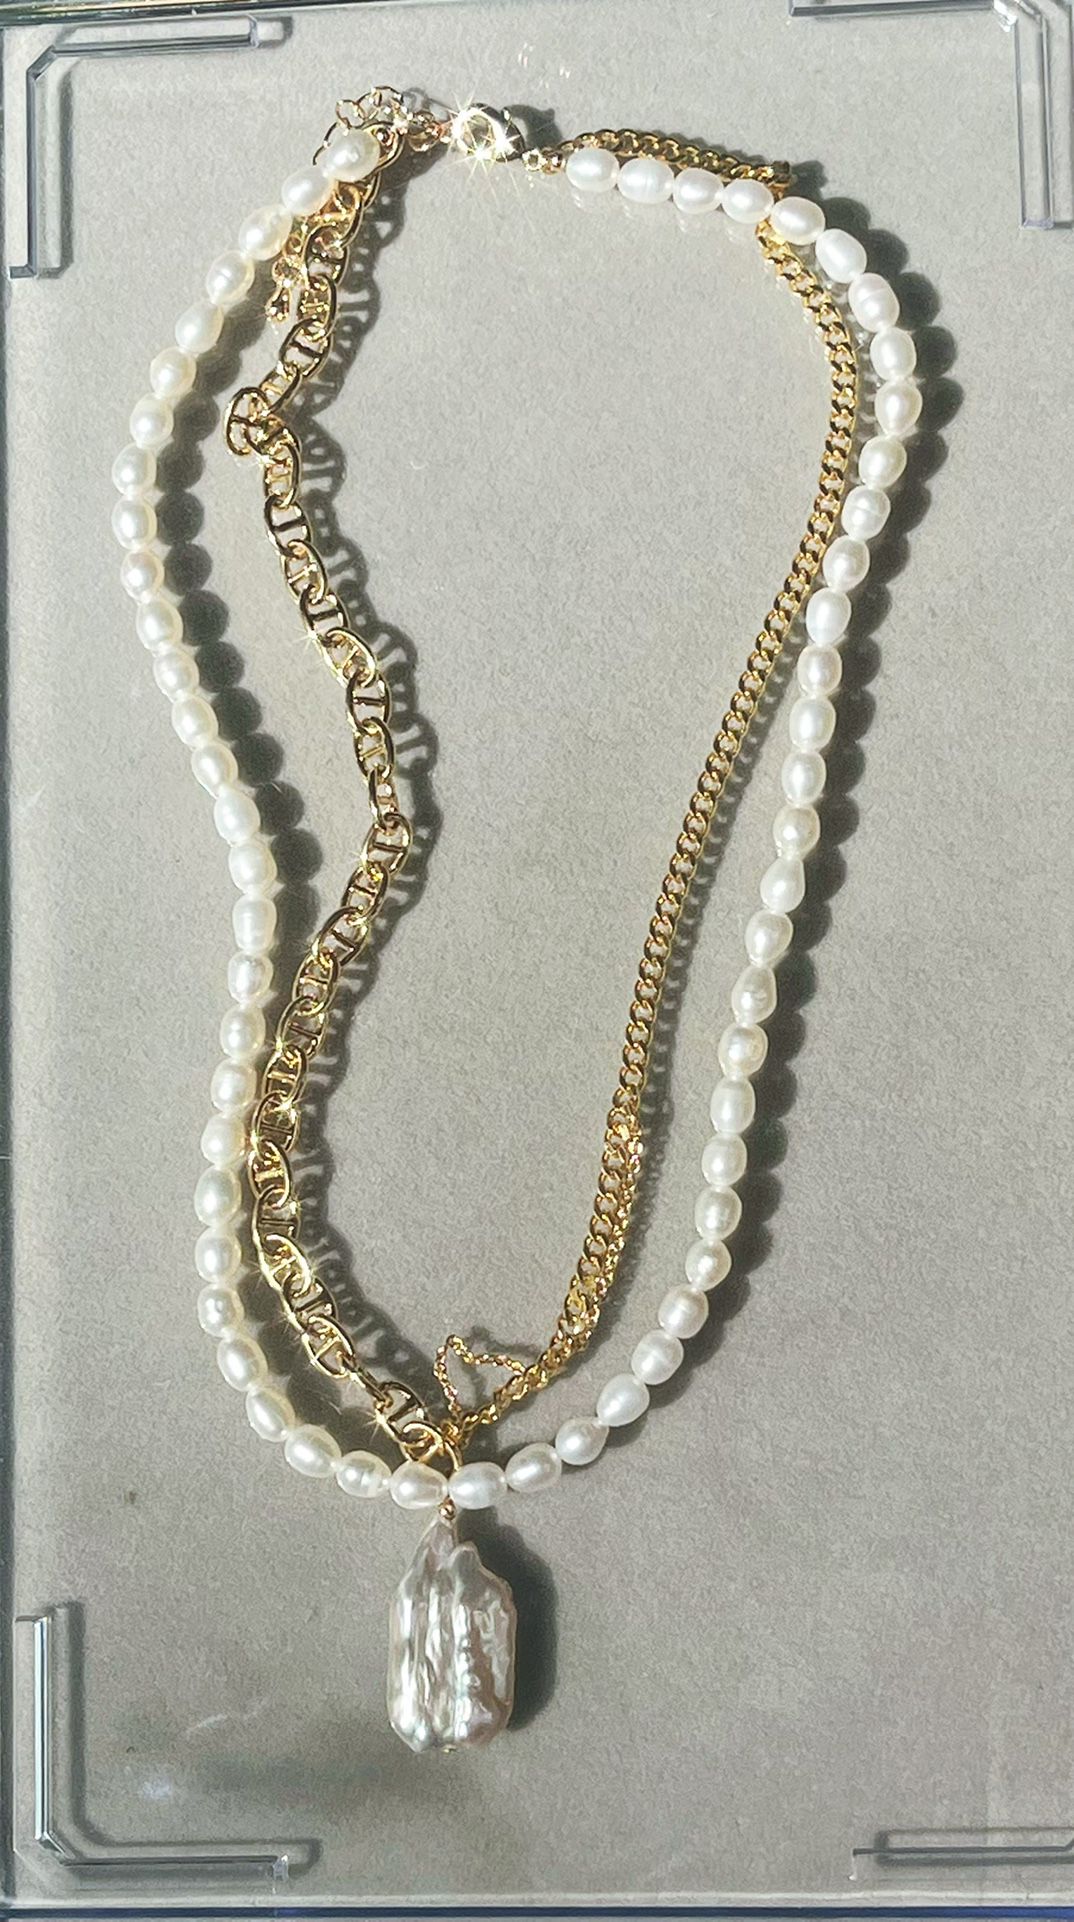 18k Gold FN Double Chain Stacked all nature Baroque Pearl Necklace,25mm Baroque